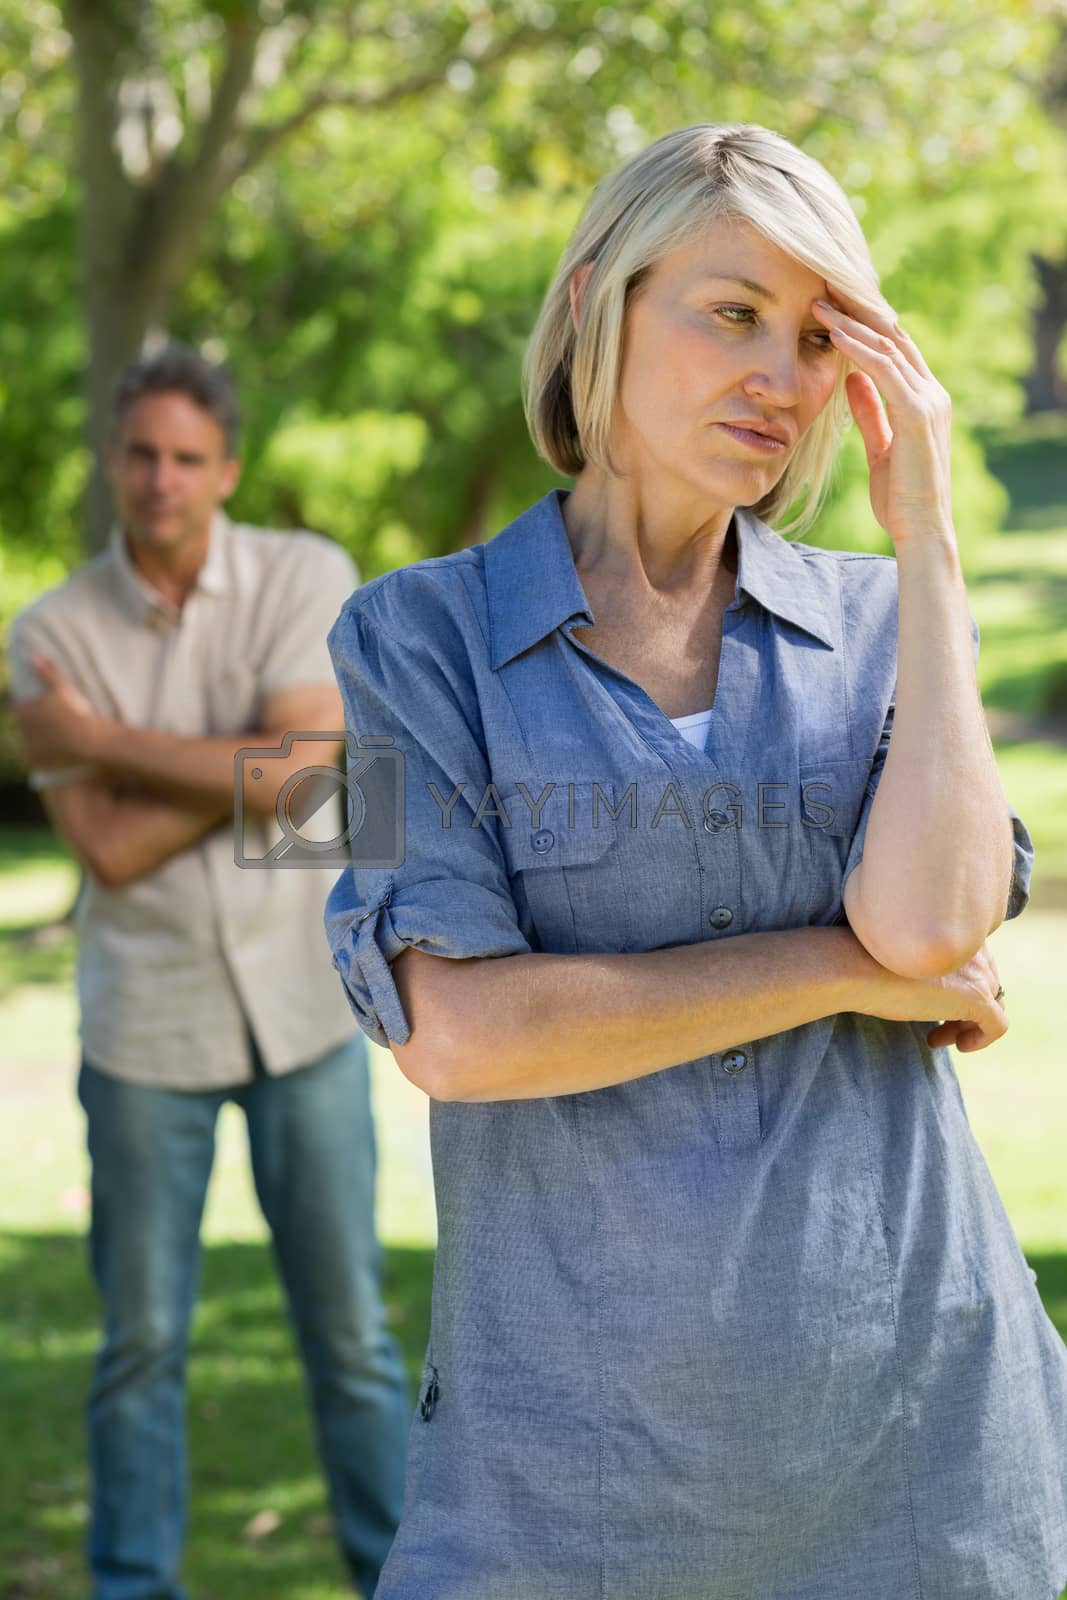 Royalty free image of Upset couple in park by Wavebreakmedia